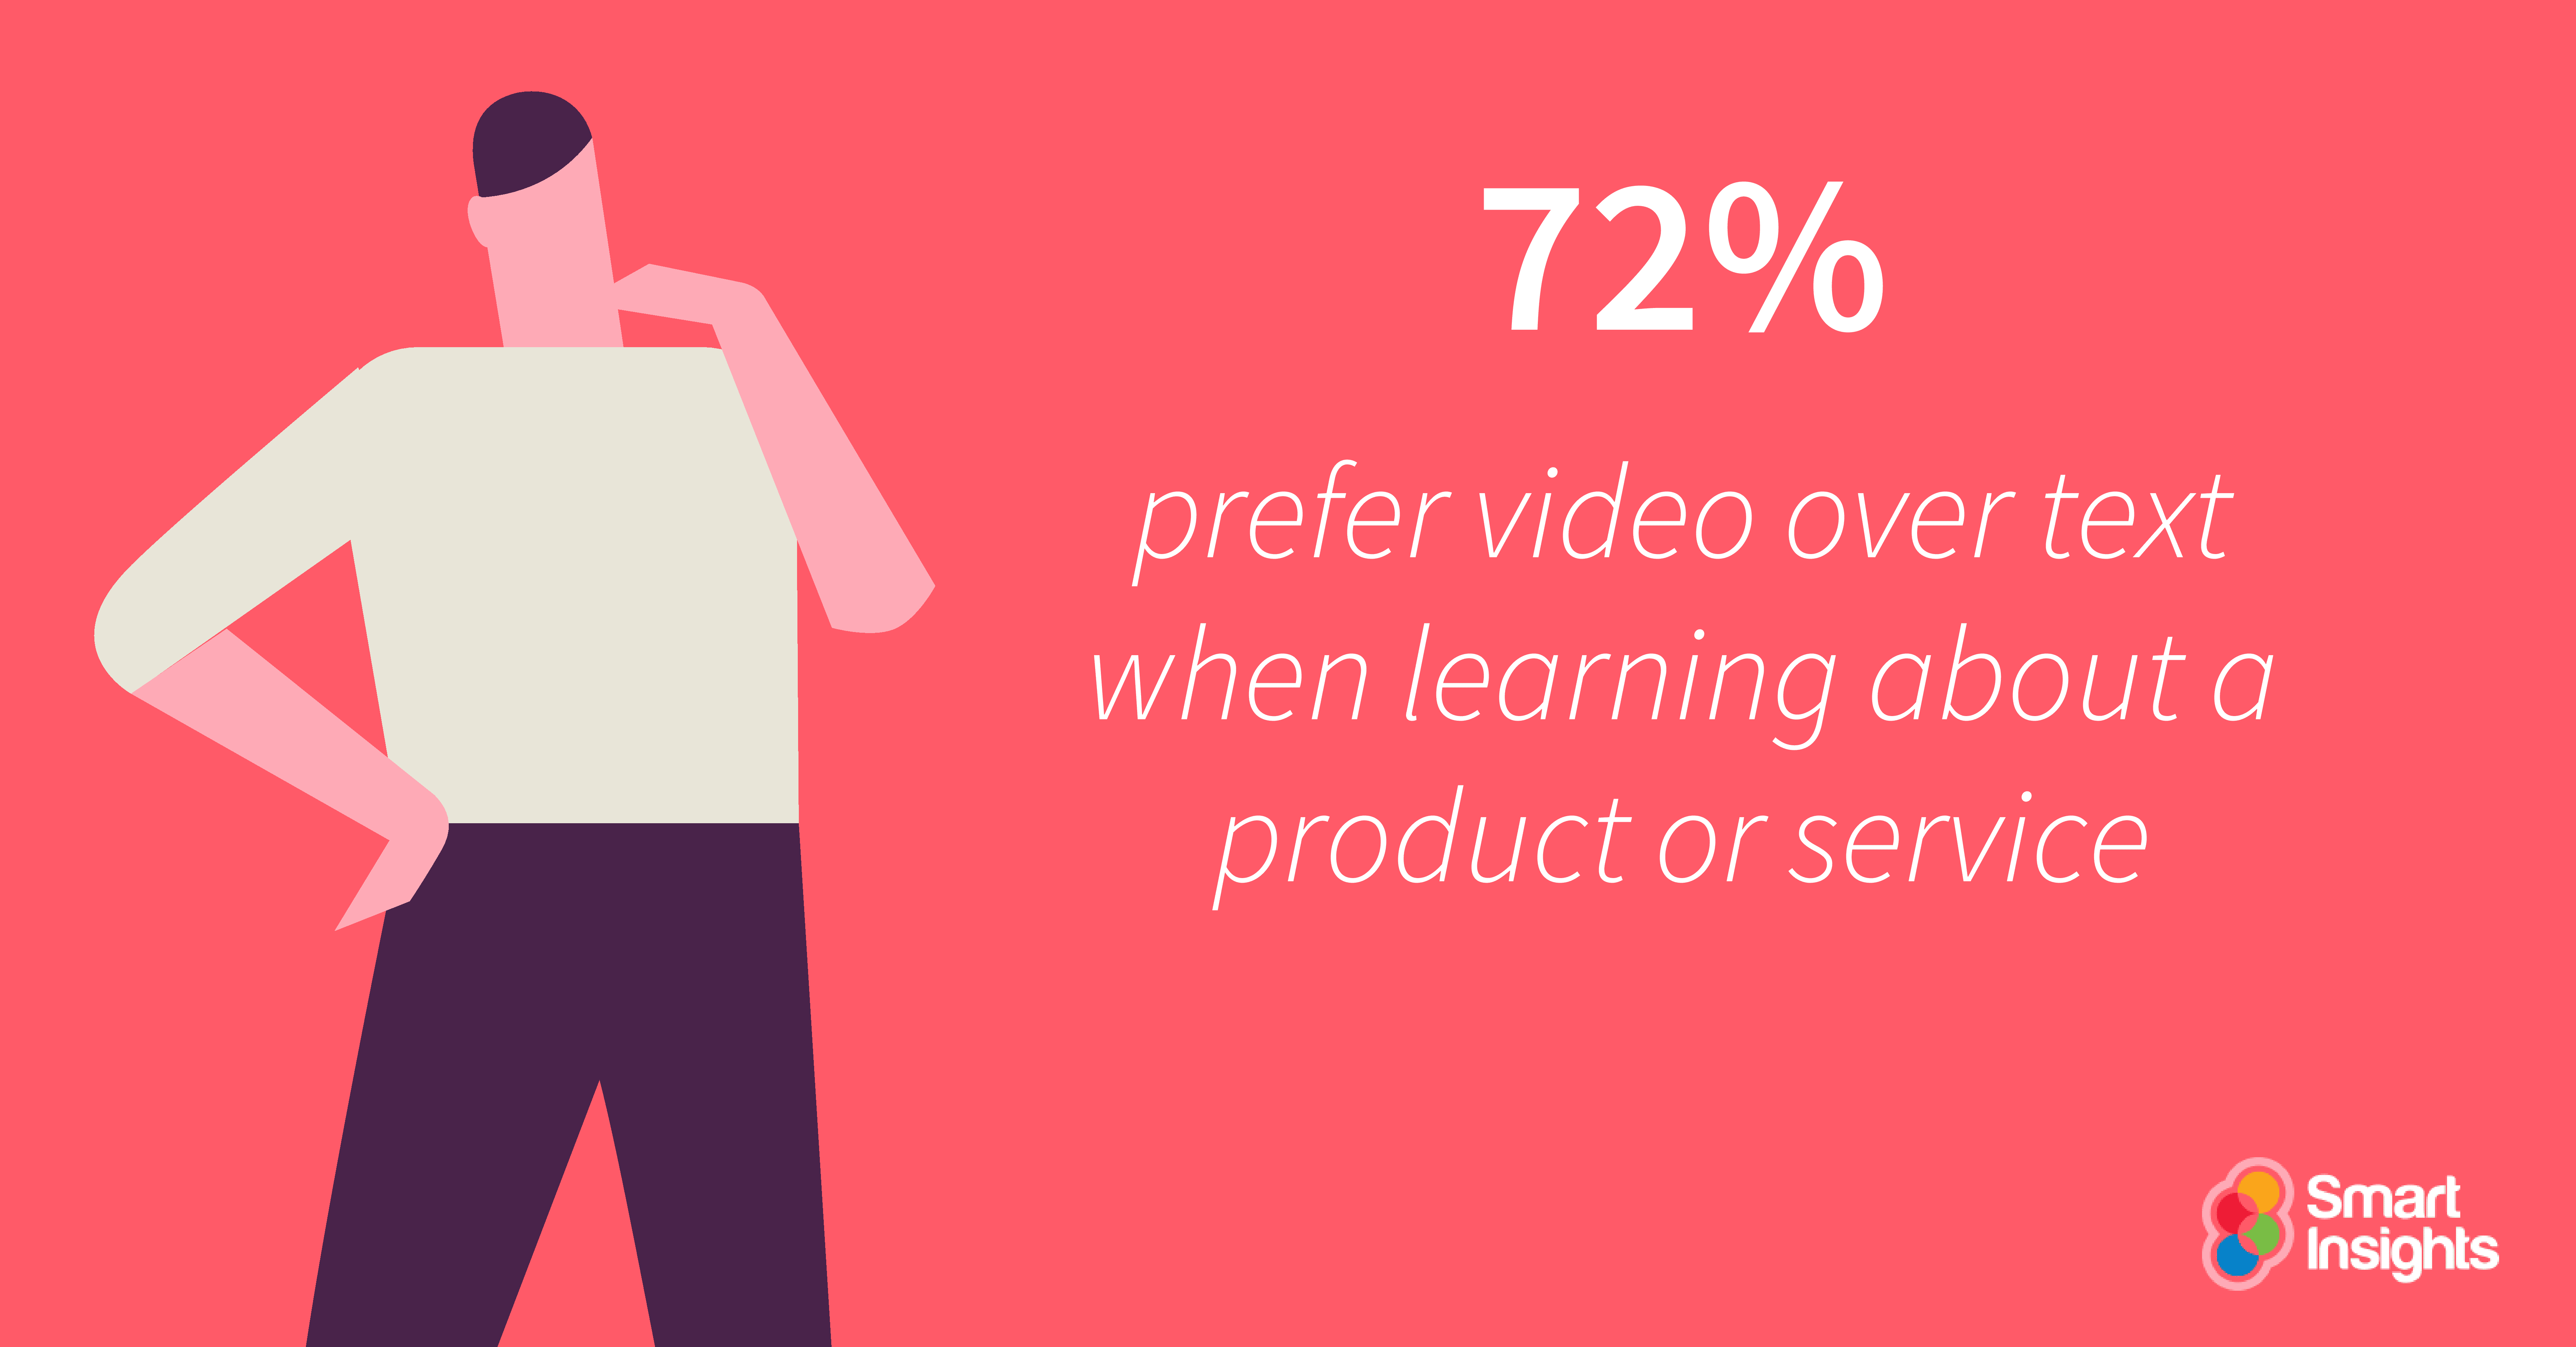 72-prefer-video-over-text-when-learning-about-a-product-or-service